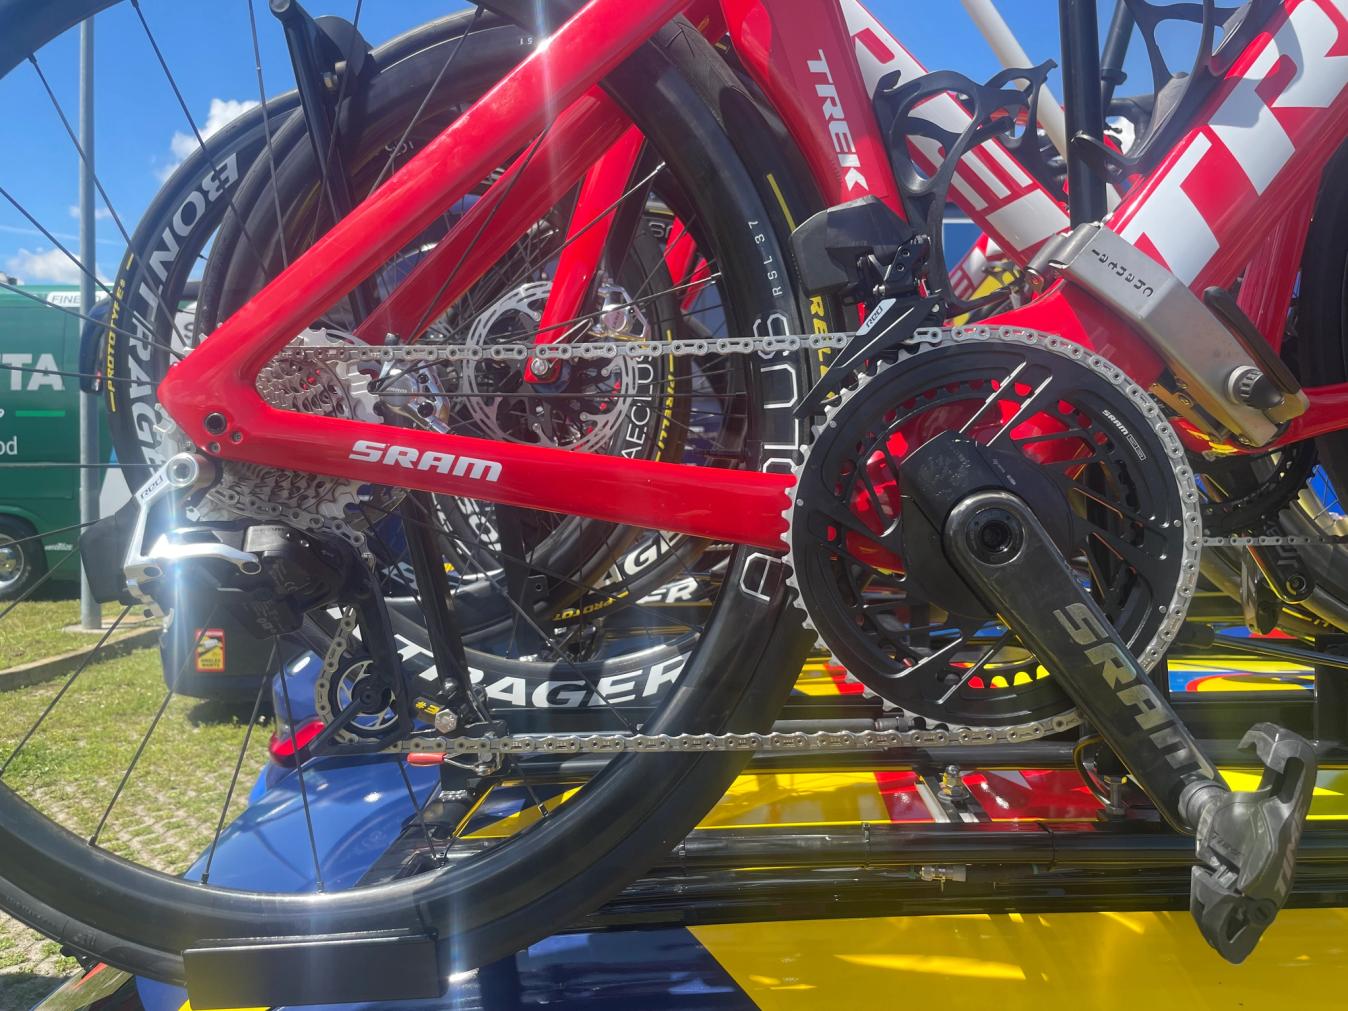 The new groupset sits upon a Lidl-Trek spare bike on stage 1 of the Giro d'Italia